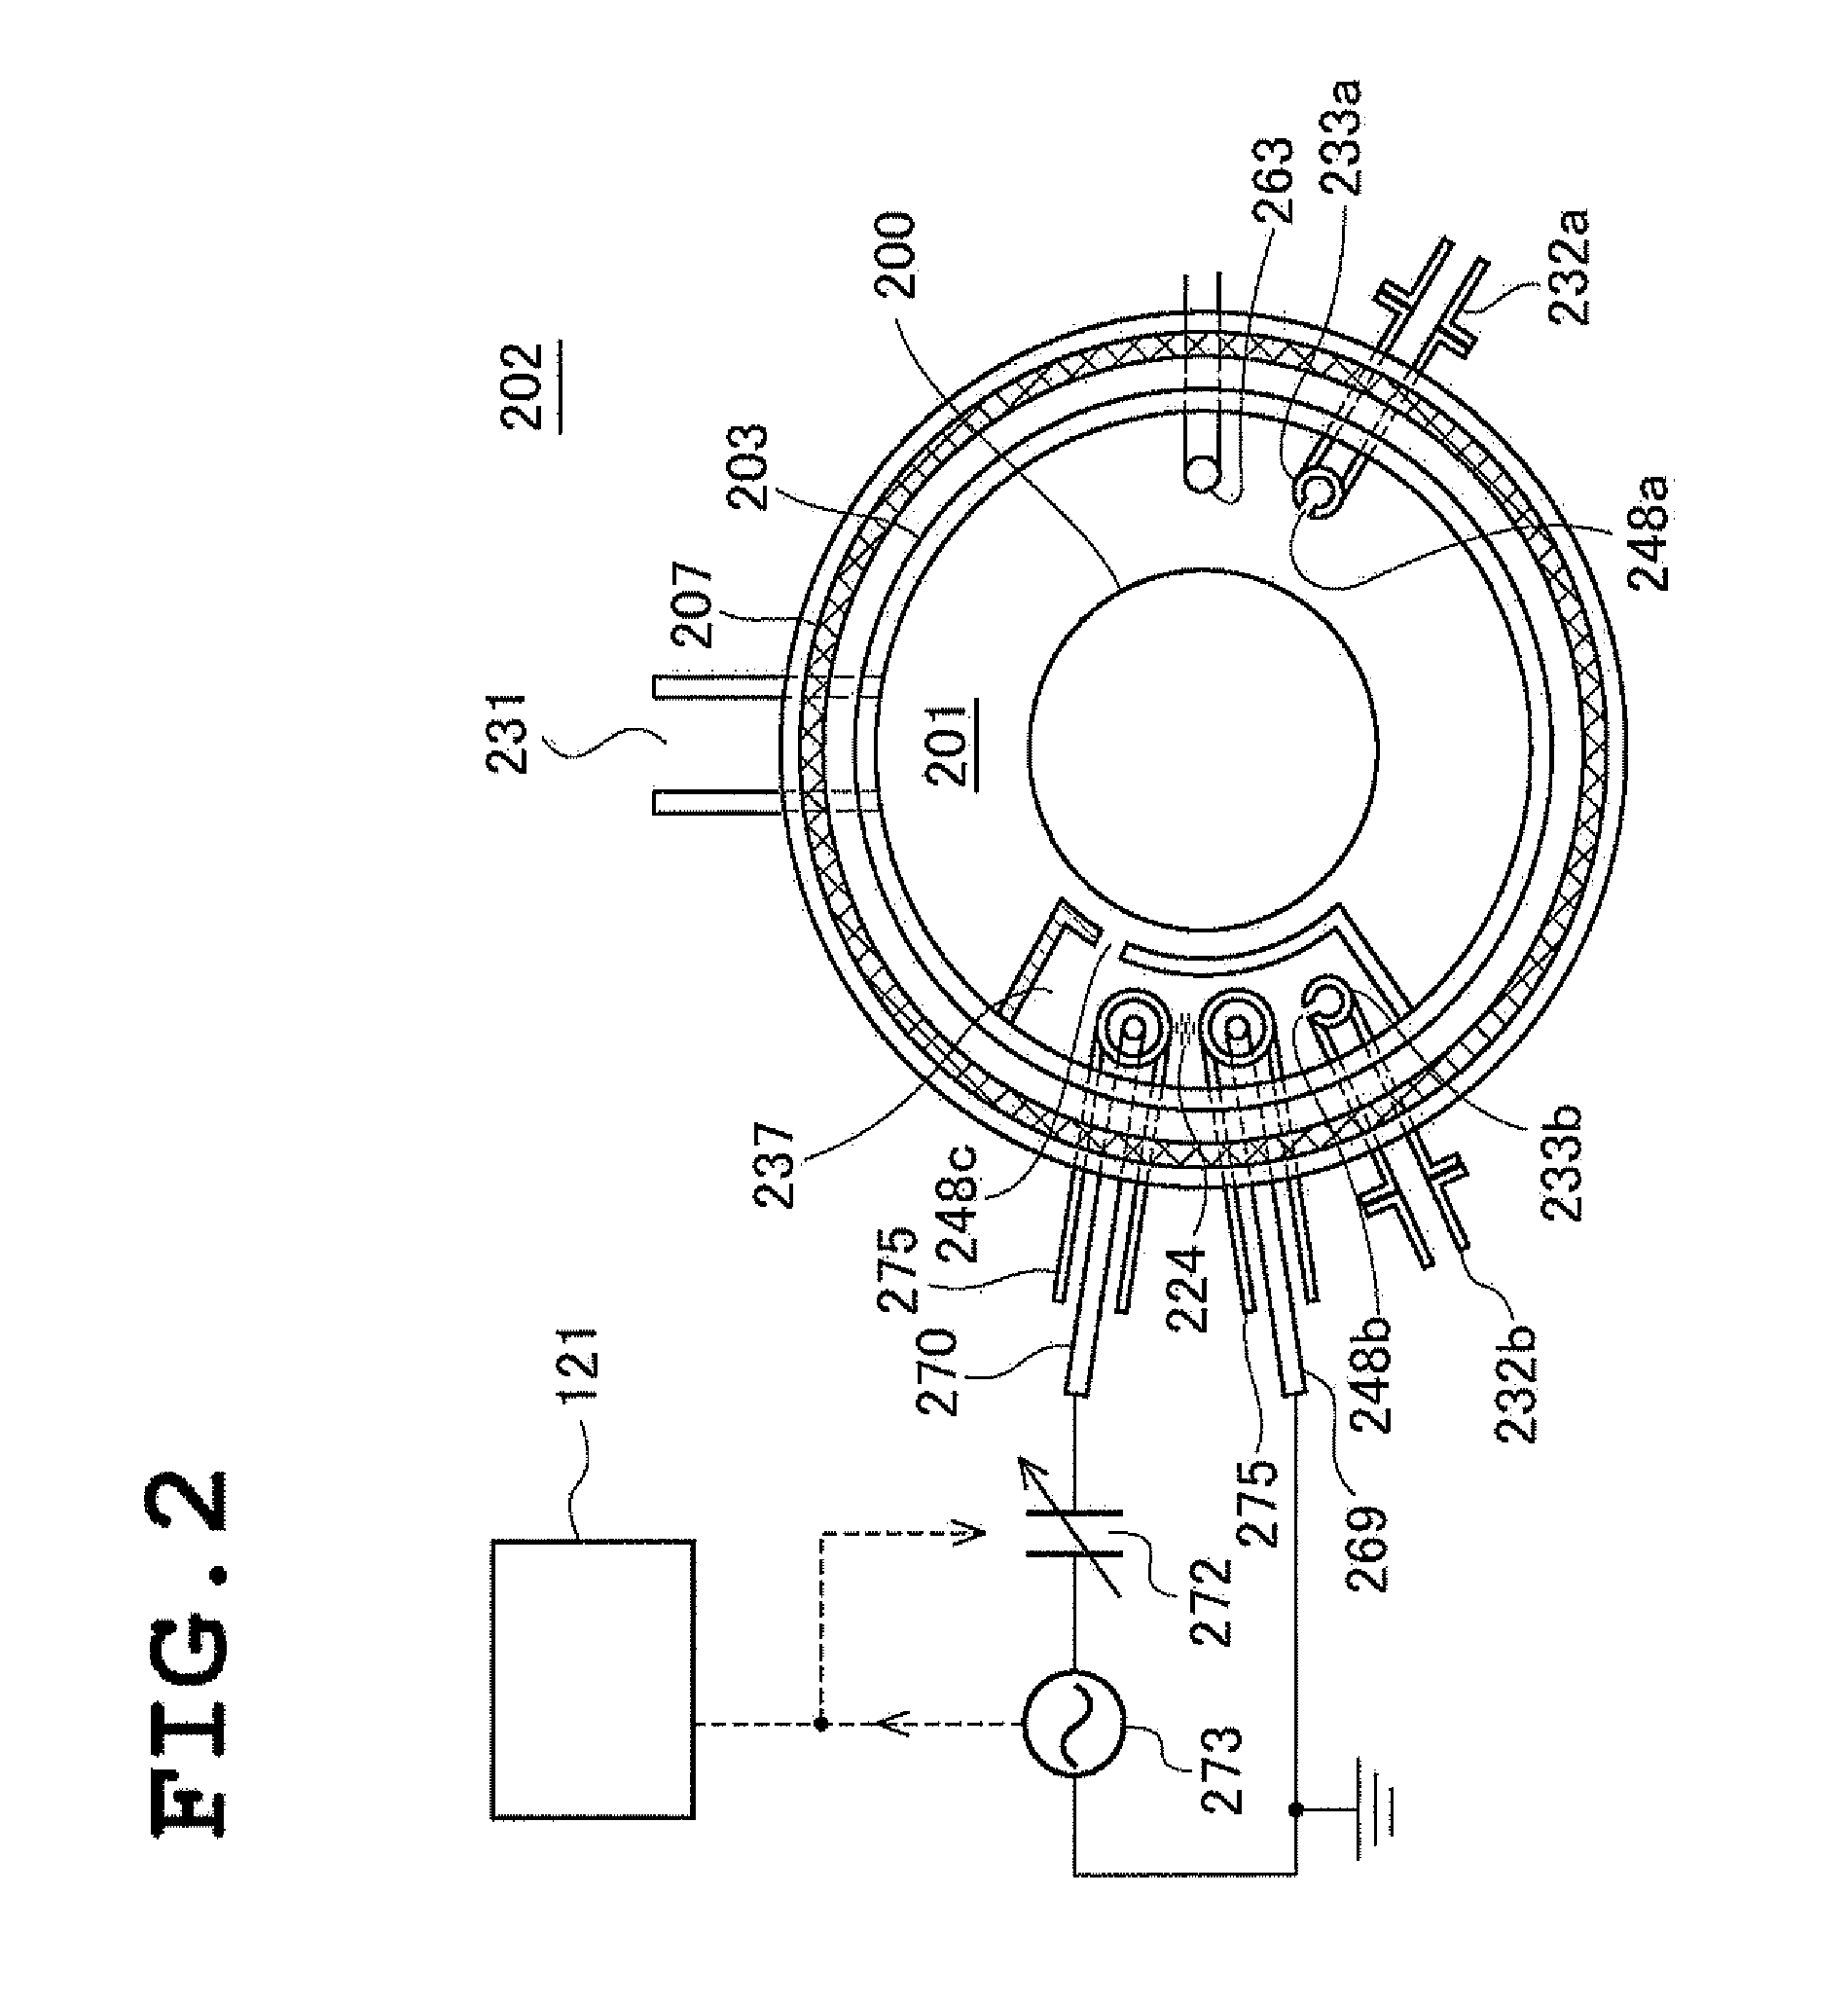 Method of manufacturing semiconductor device, method of processing substrate and substrate processing apparatus